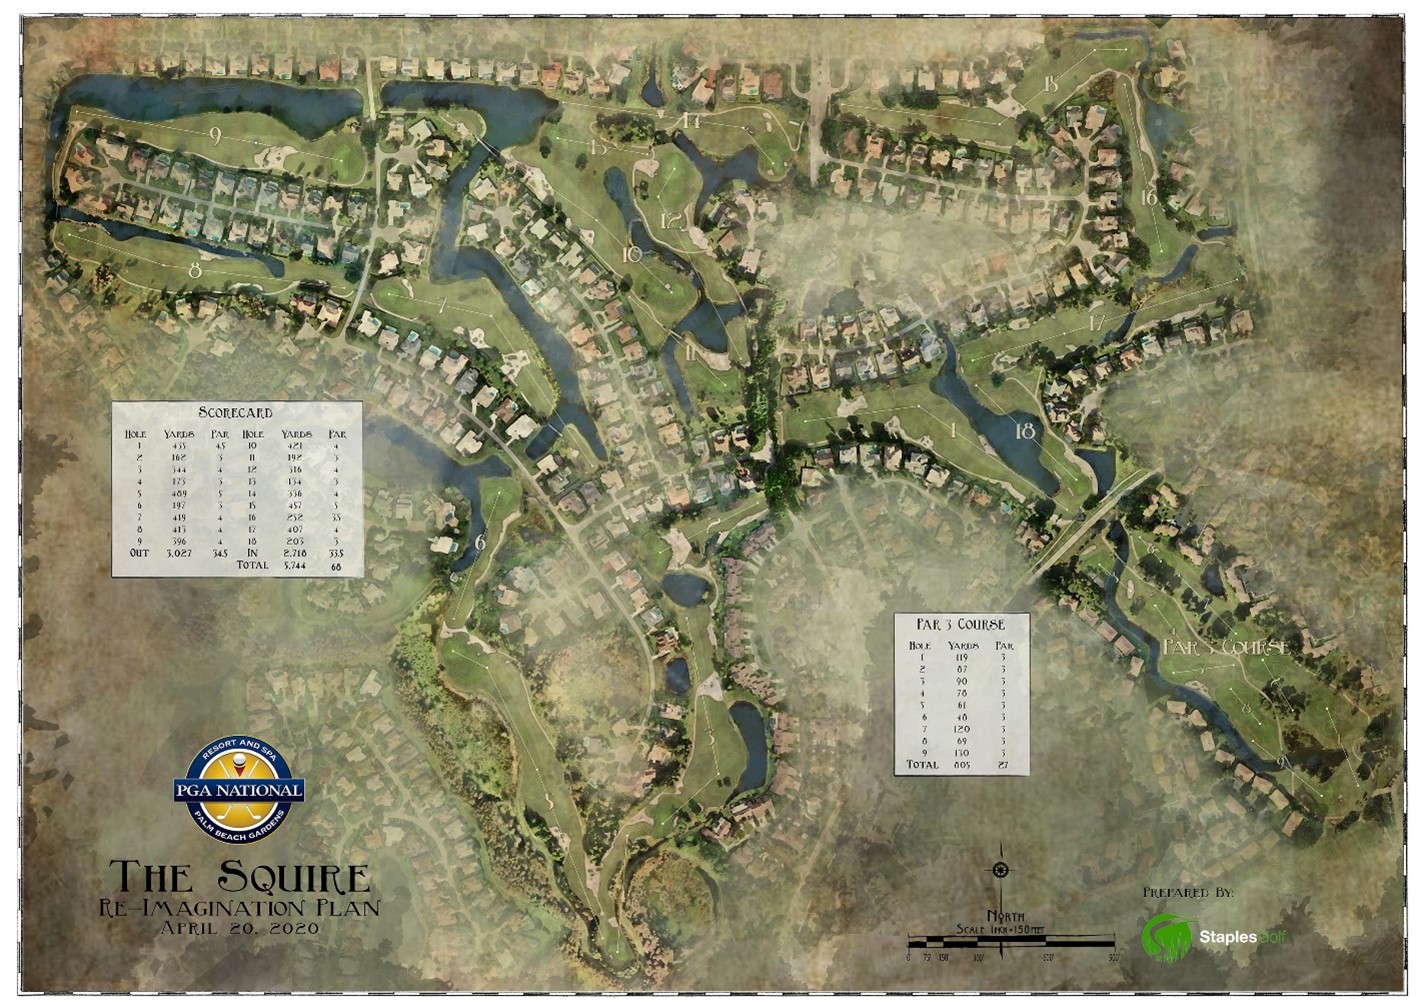 The Squire Course